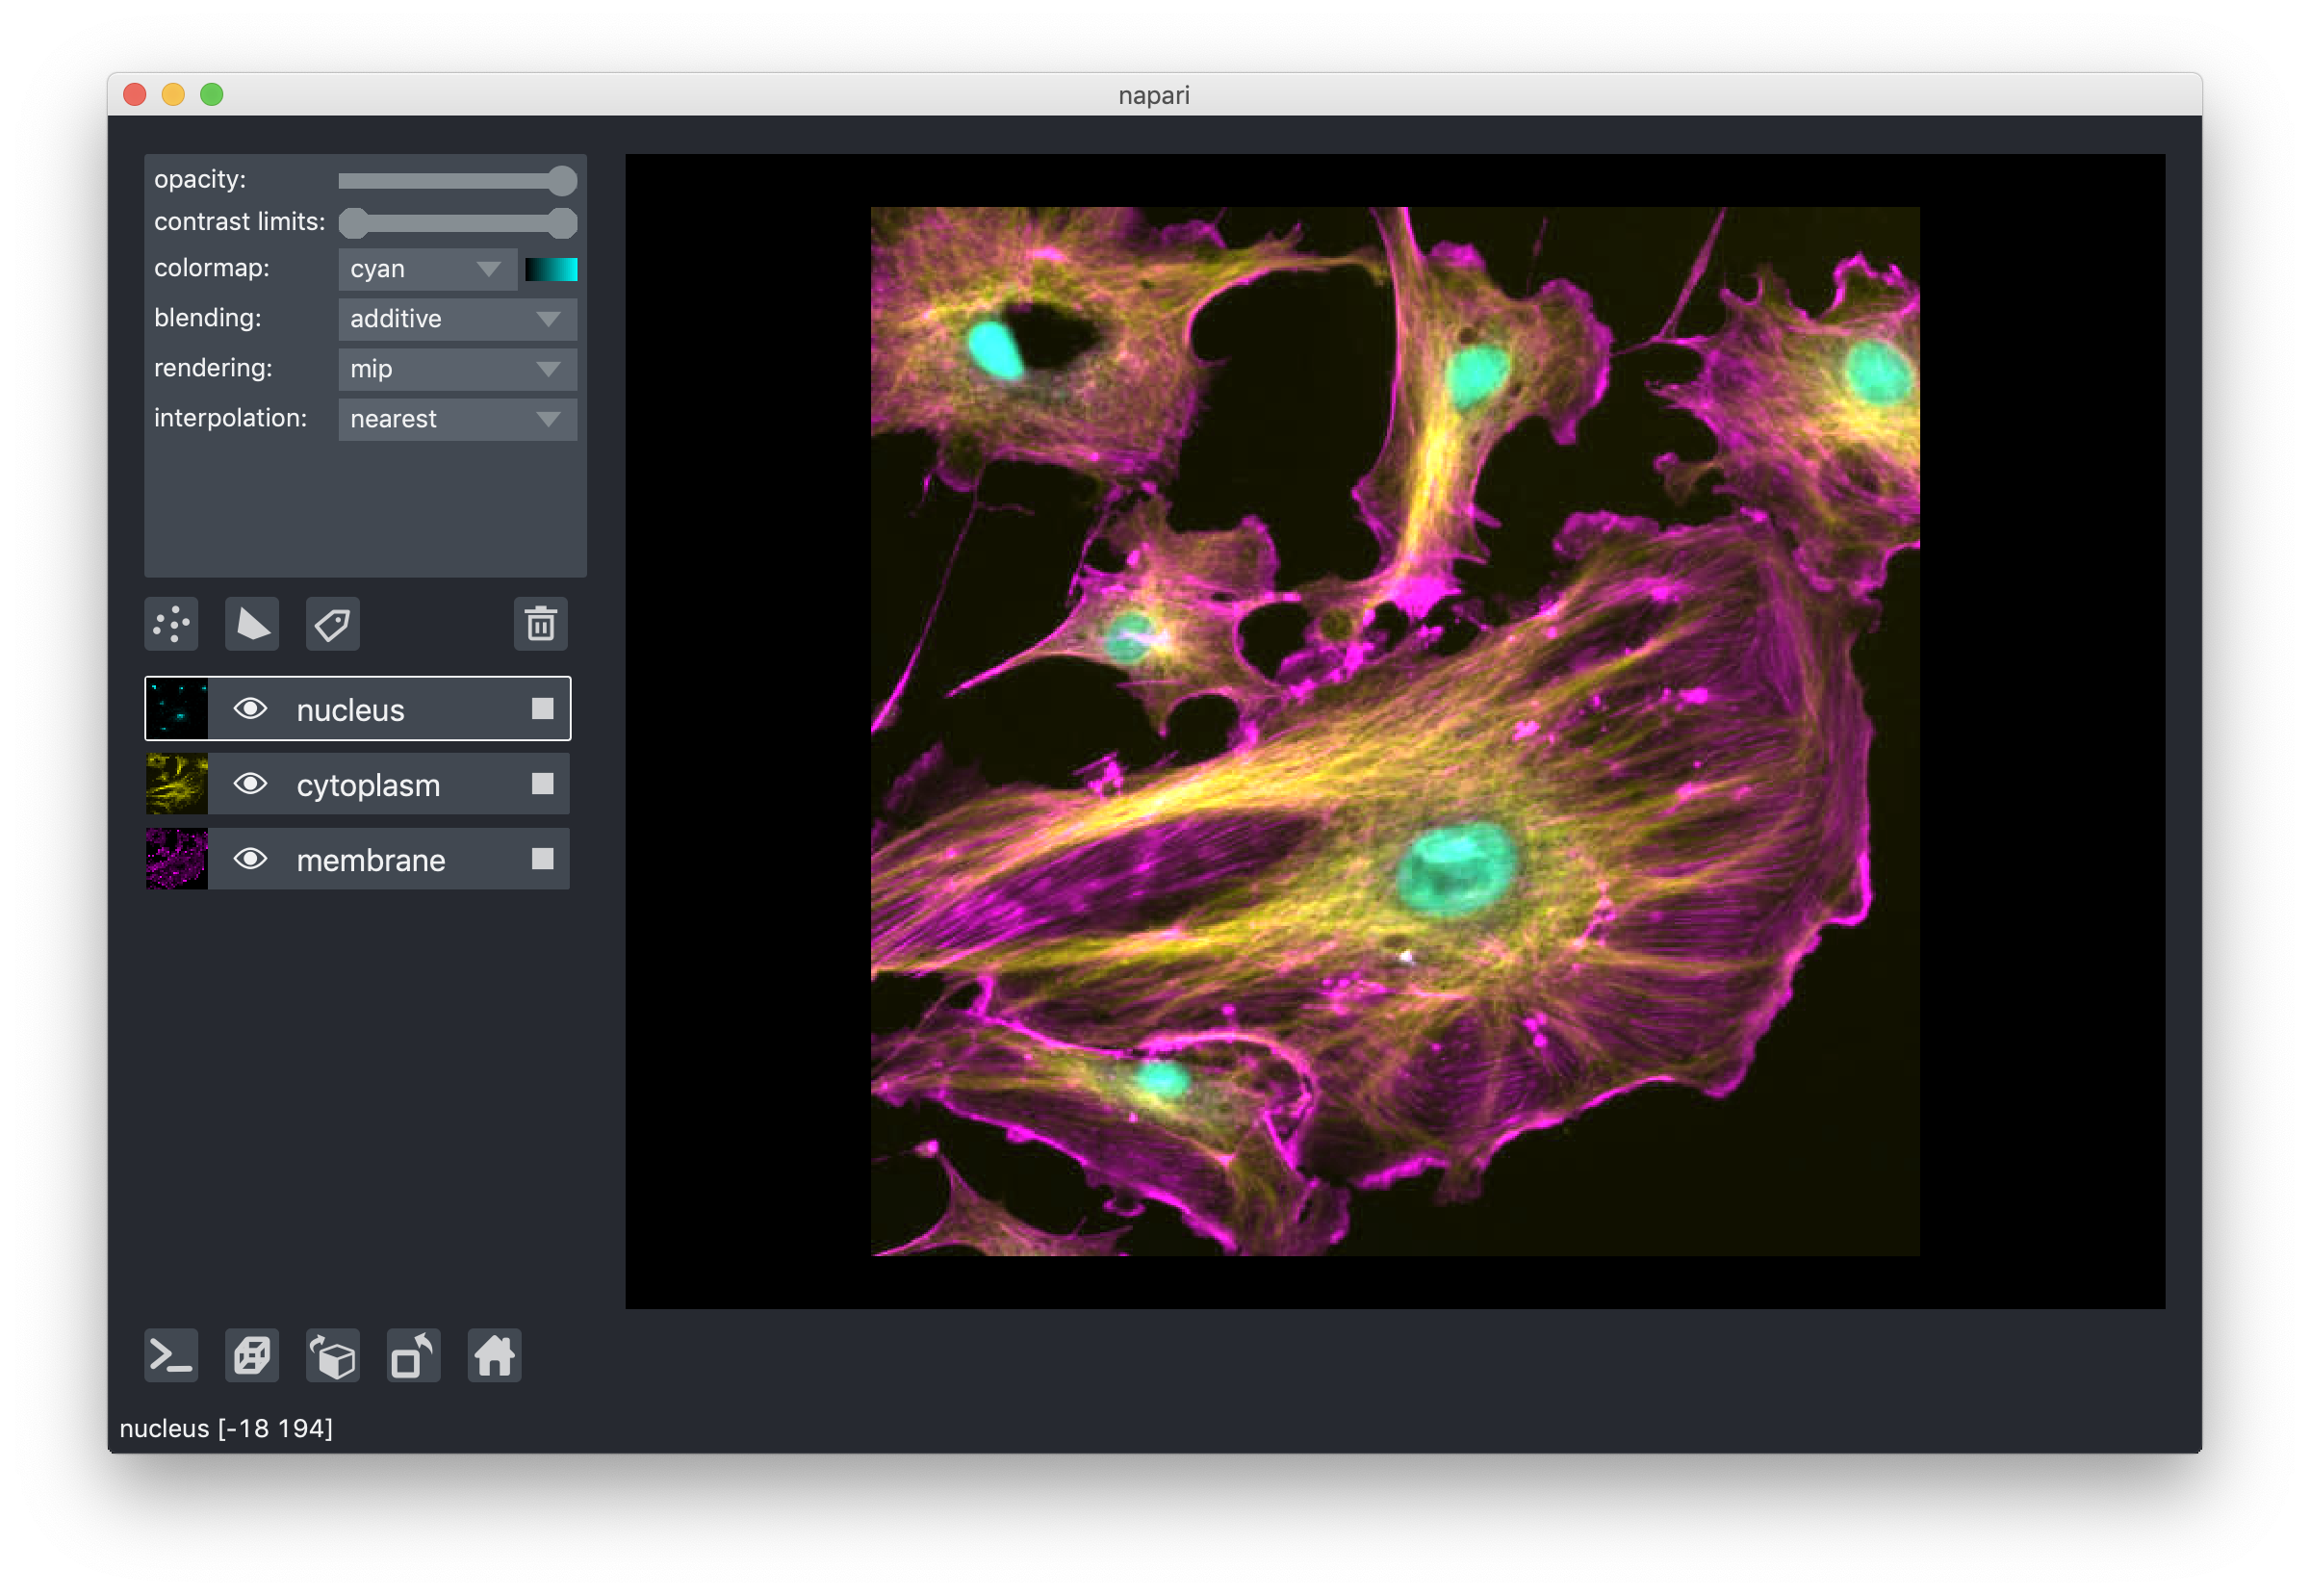 napari viewer with an image of a cell. Layer controls are open in the left sidebar with the blending set to additive.